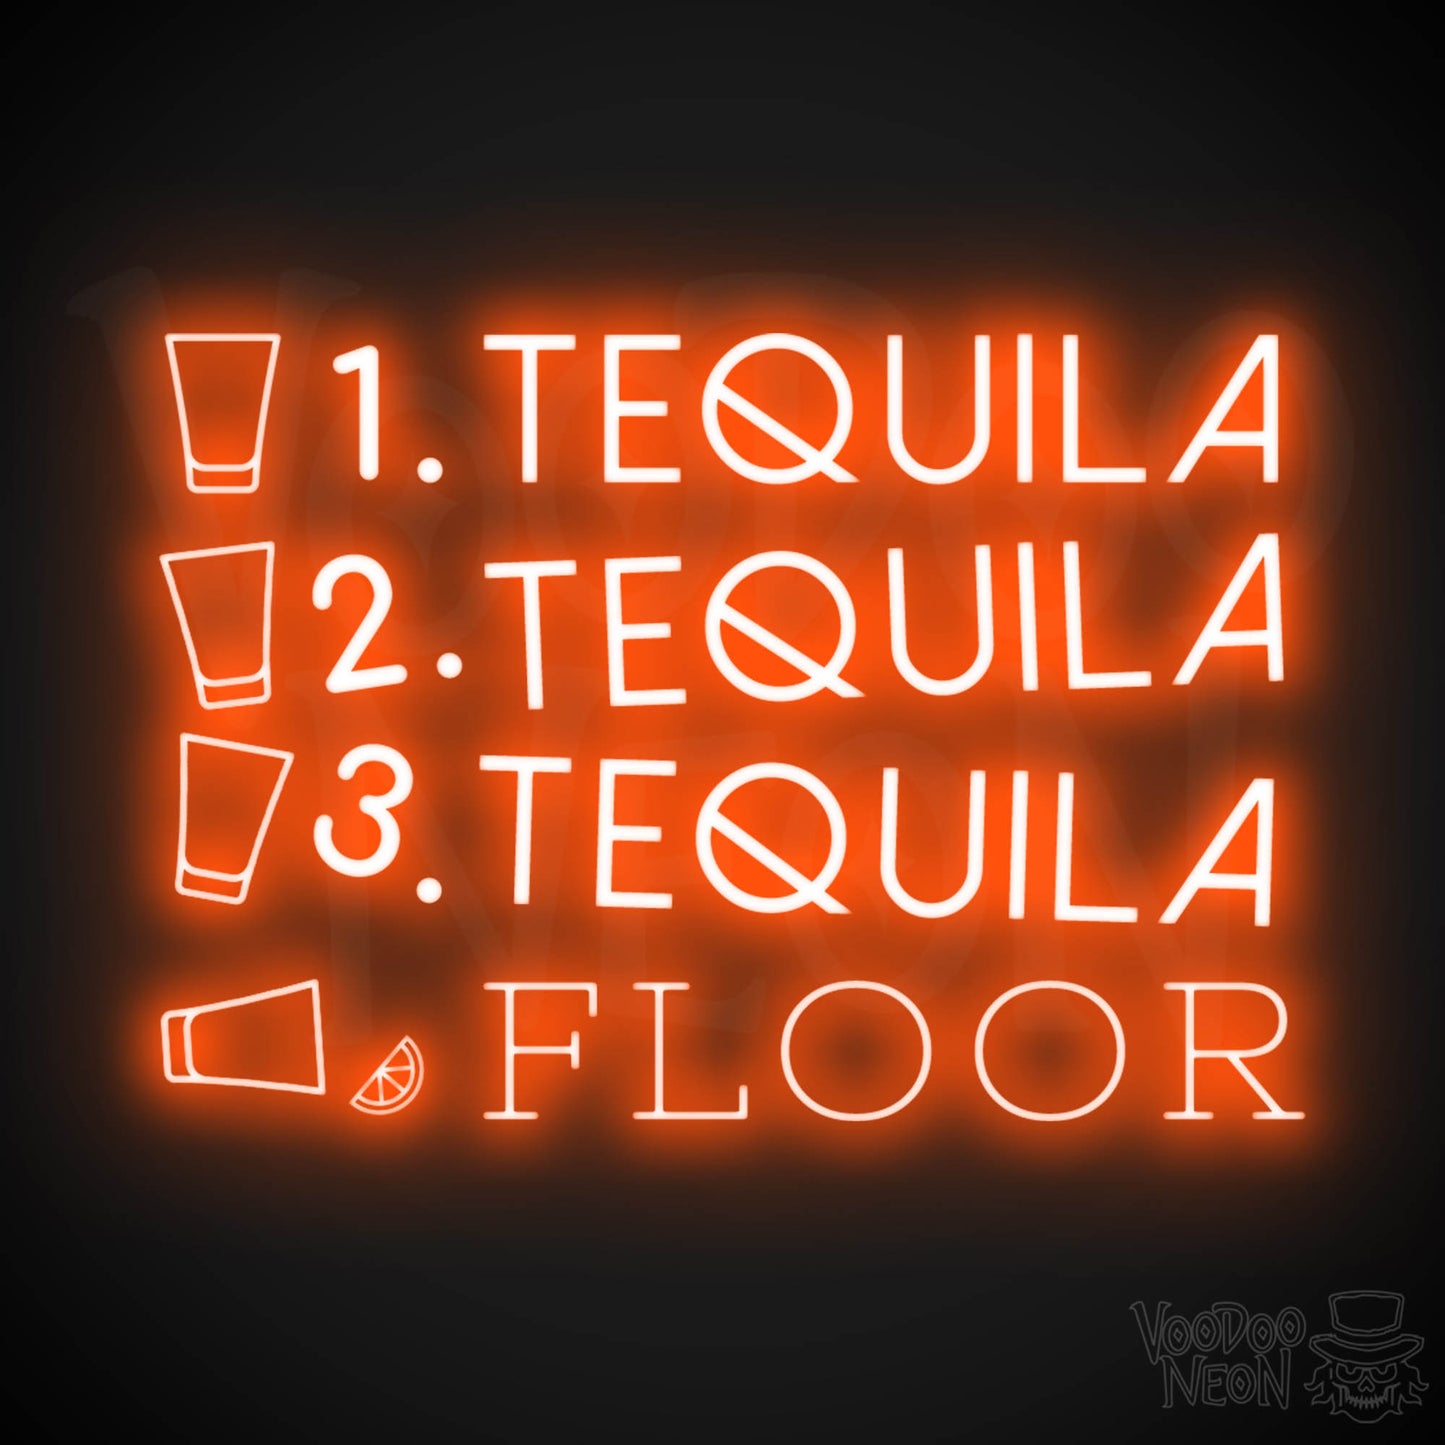 One Tequila Two Tequila Three Tequila Floor Neon sign - Neon Wall Art - Color Orange